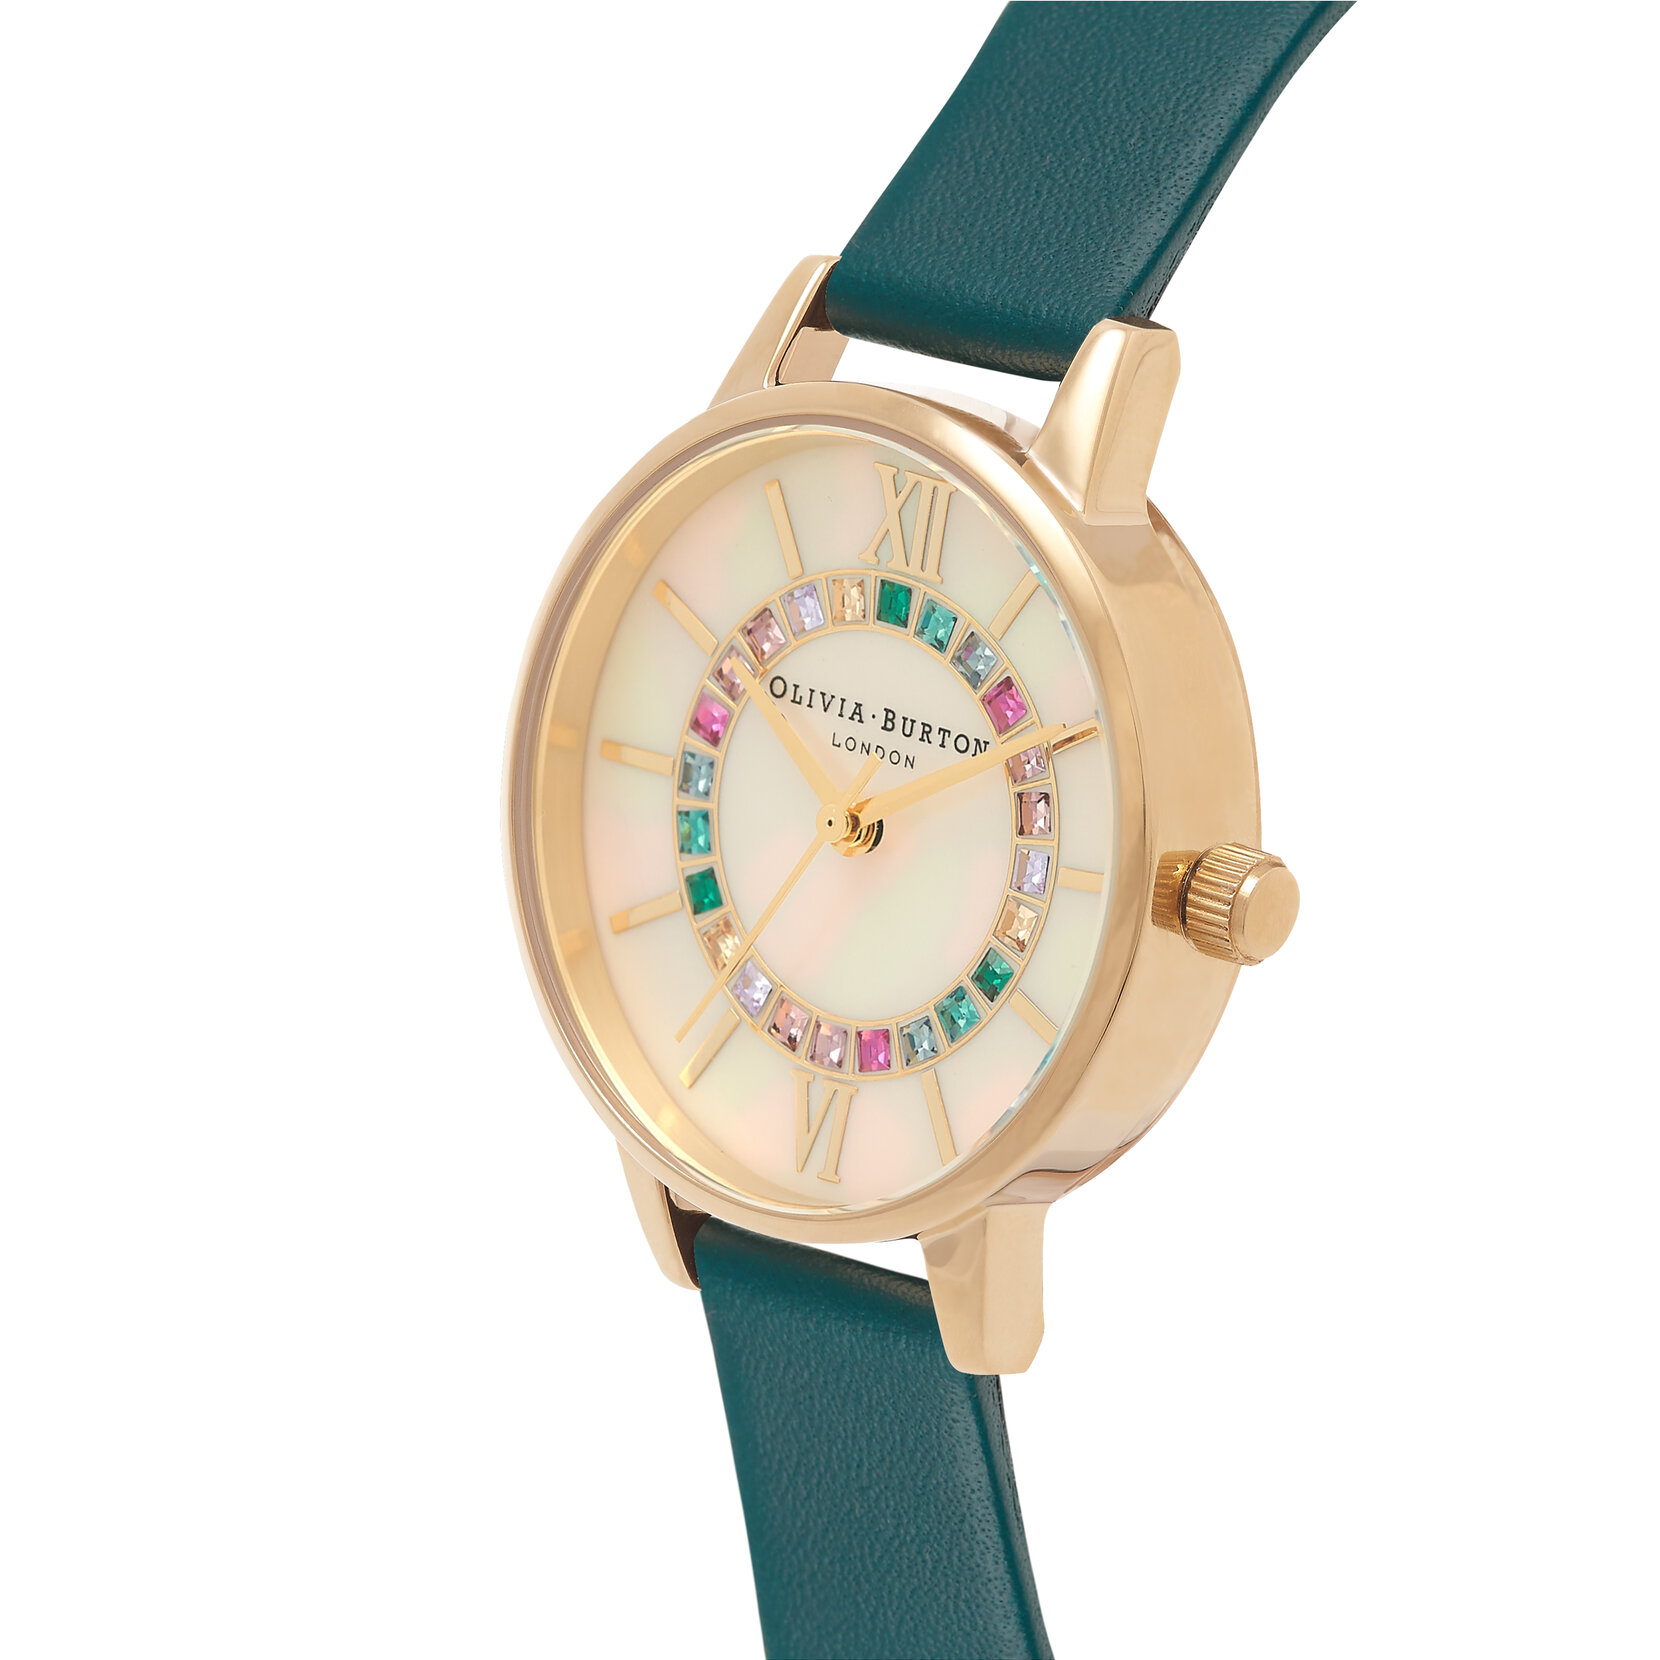 30mm Gold & Teal Leather Strap Watch